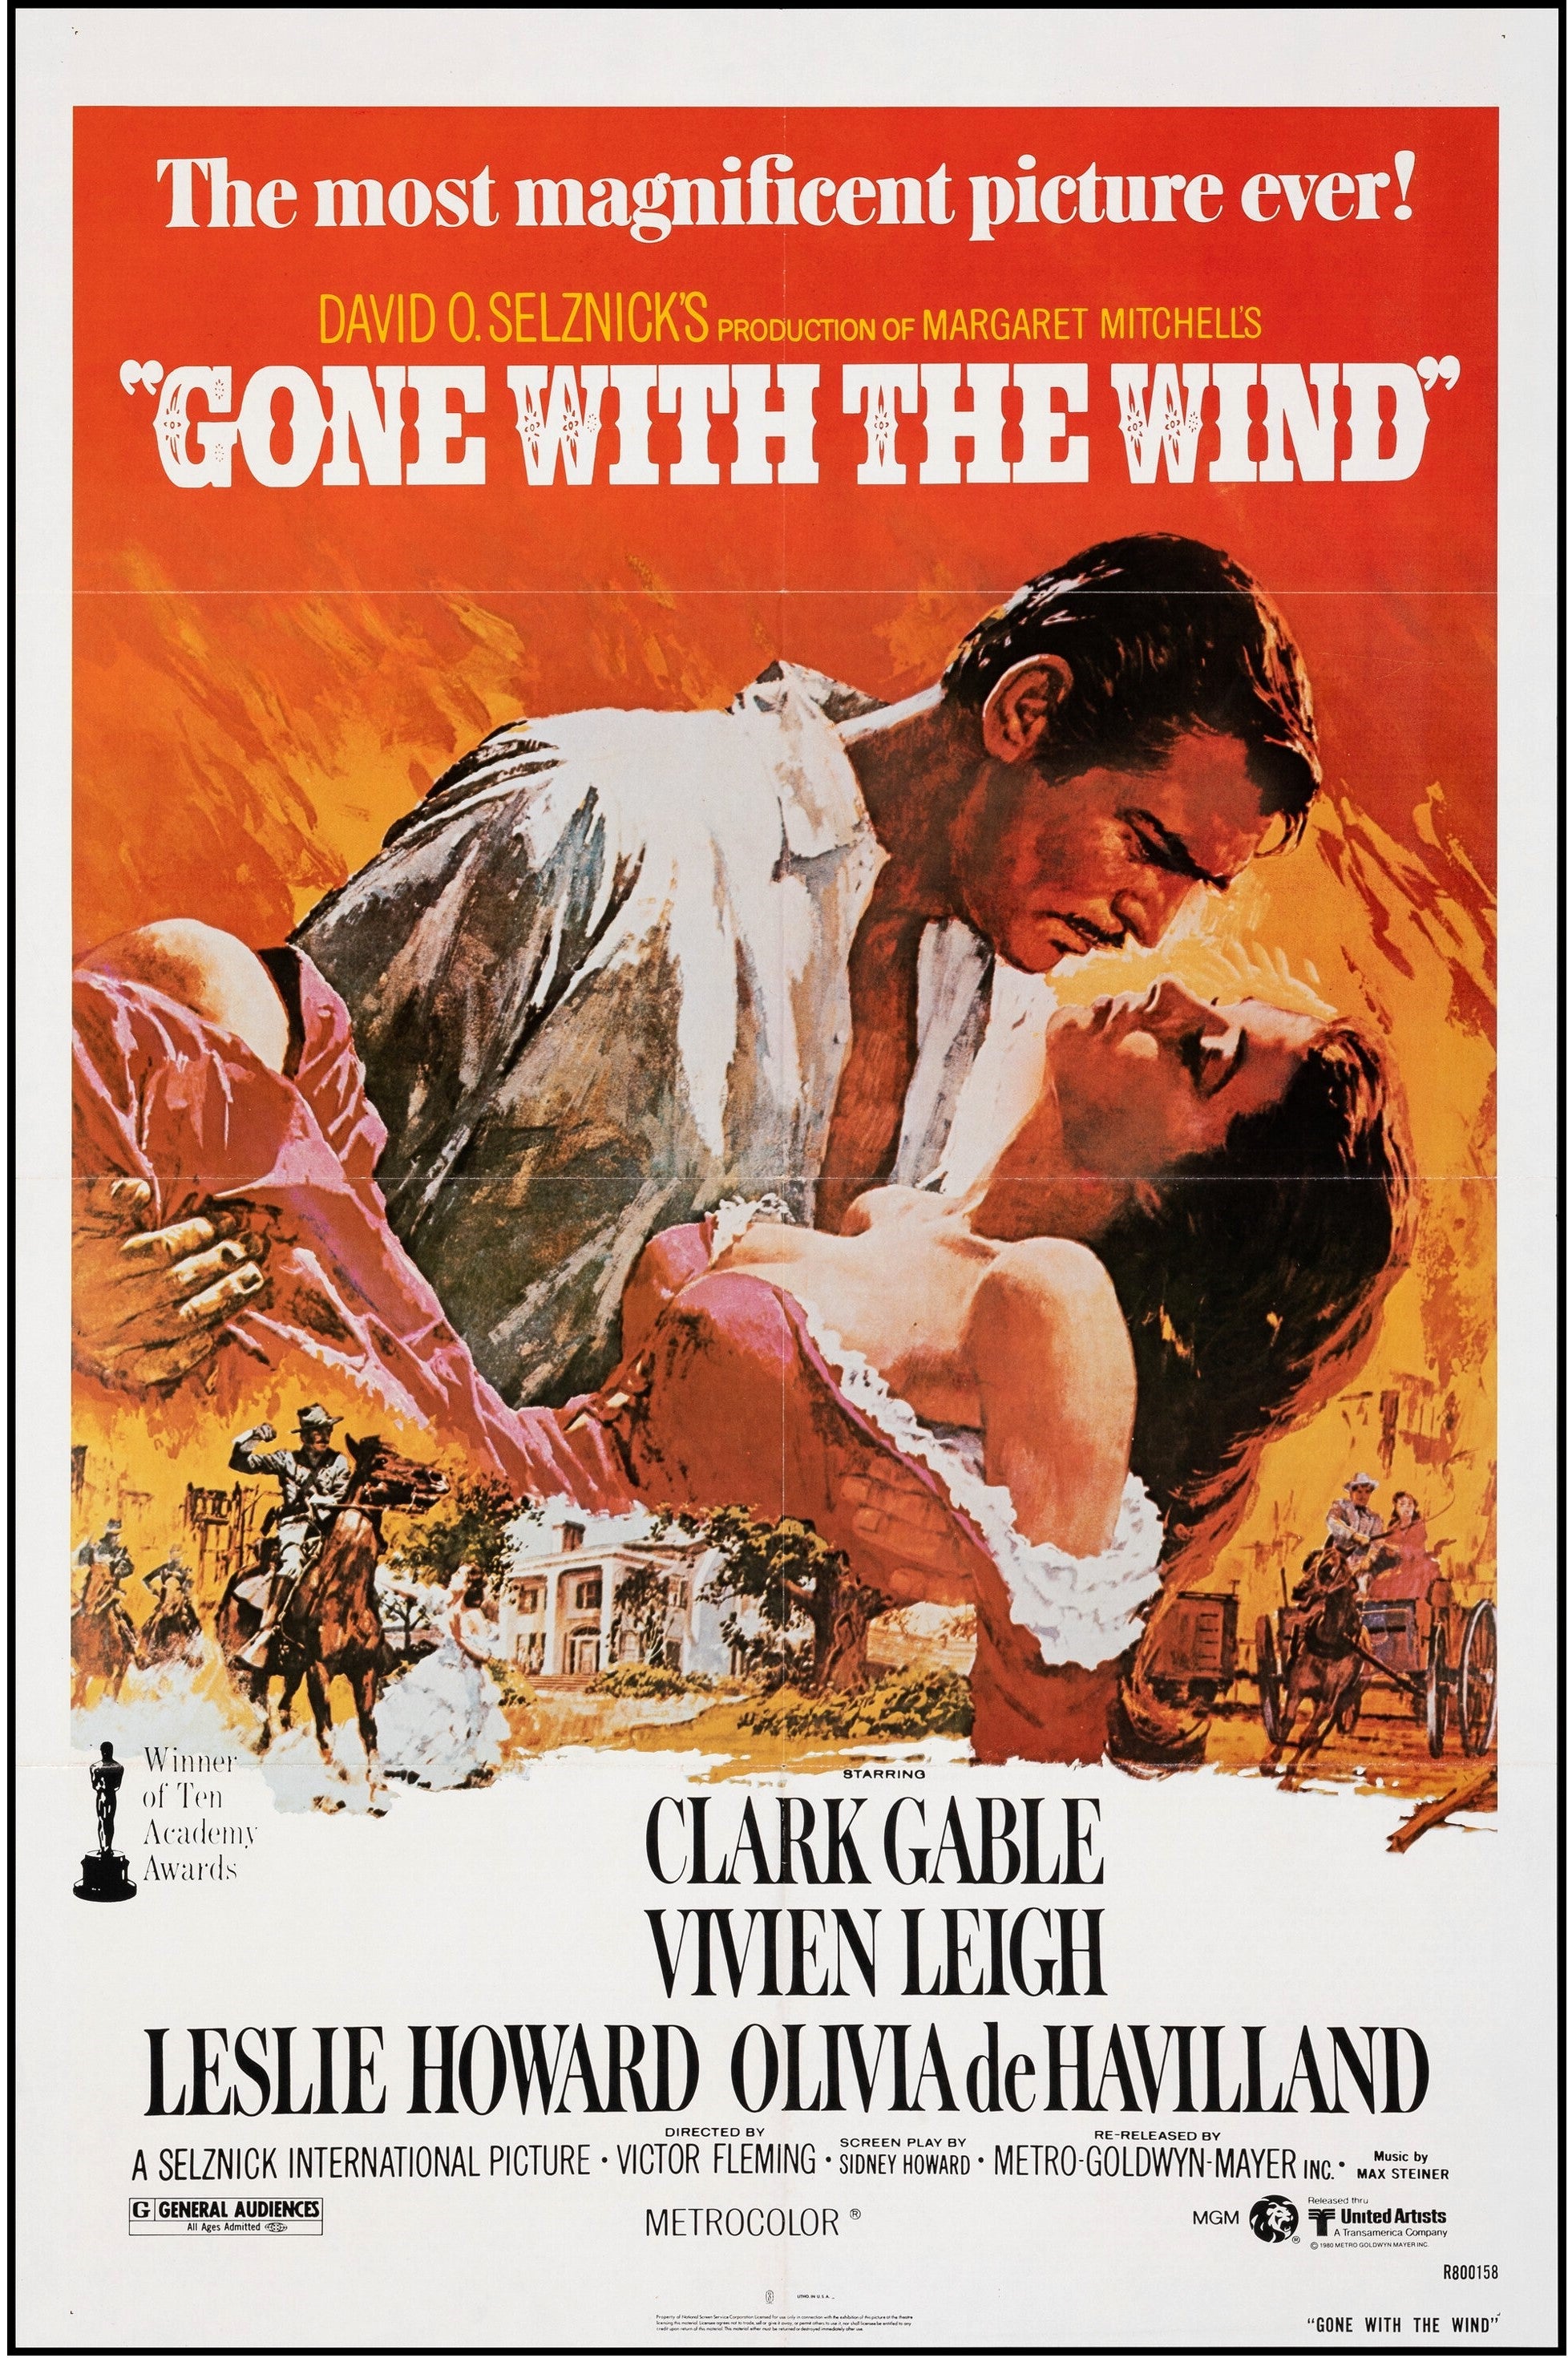 GONE WITH THE WIND (R1980)